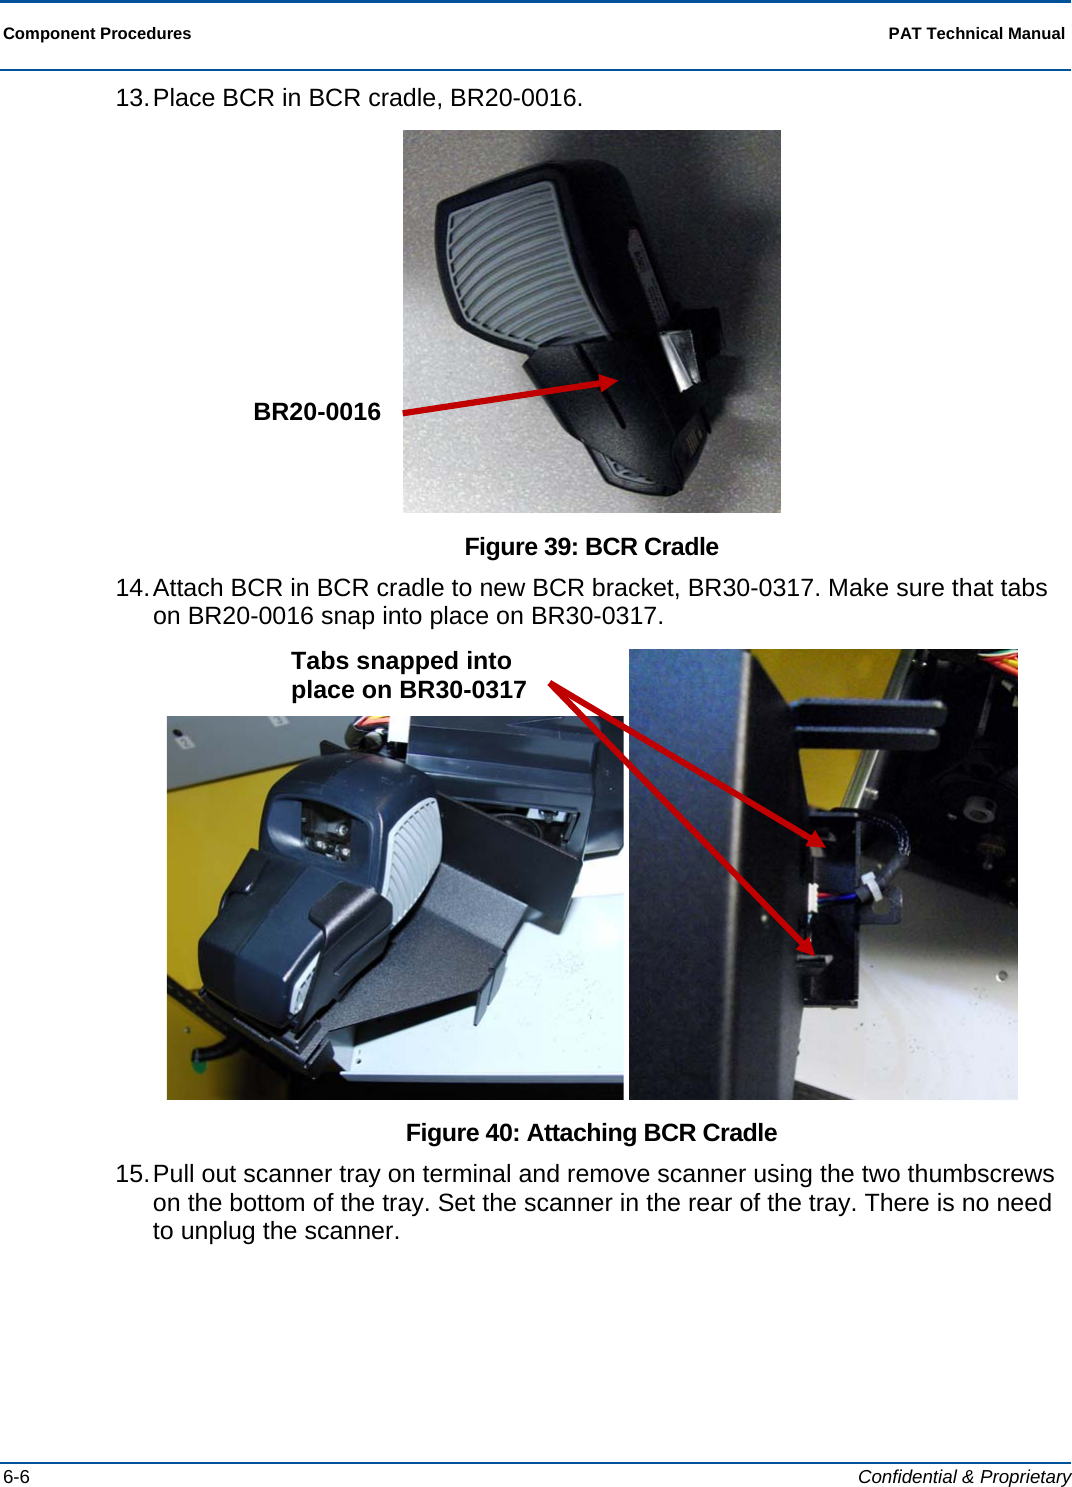  Component Procedures  PAT Technical Manual  6-6  Confidential &amp; Proprietary 13. Place BCR in BCR cradle, BR20-0016.  Figure 39: BCR Cradle 14. Attach BCR in BCR cradle to new BCR bracket, BR30-0317. Make sure that tabs on BR20-0016 snap into place on BR30-0317.    Figure 40: Attaching BCR Cradle 15. Pull out scanner tray on terminal and remove scanner using the two thumbscrews on the bottom of the tray. Set the scanner in the rear of the tray. There is no need to unplug the scanner. BR20-0016 Tabs snapped into place on BR30-0317